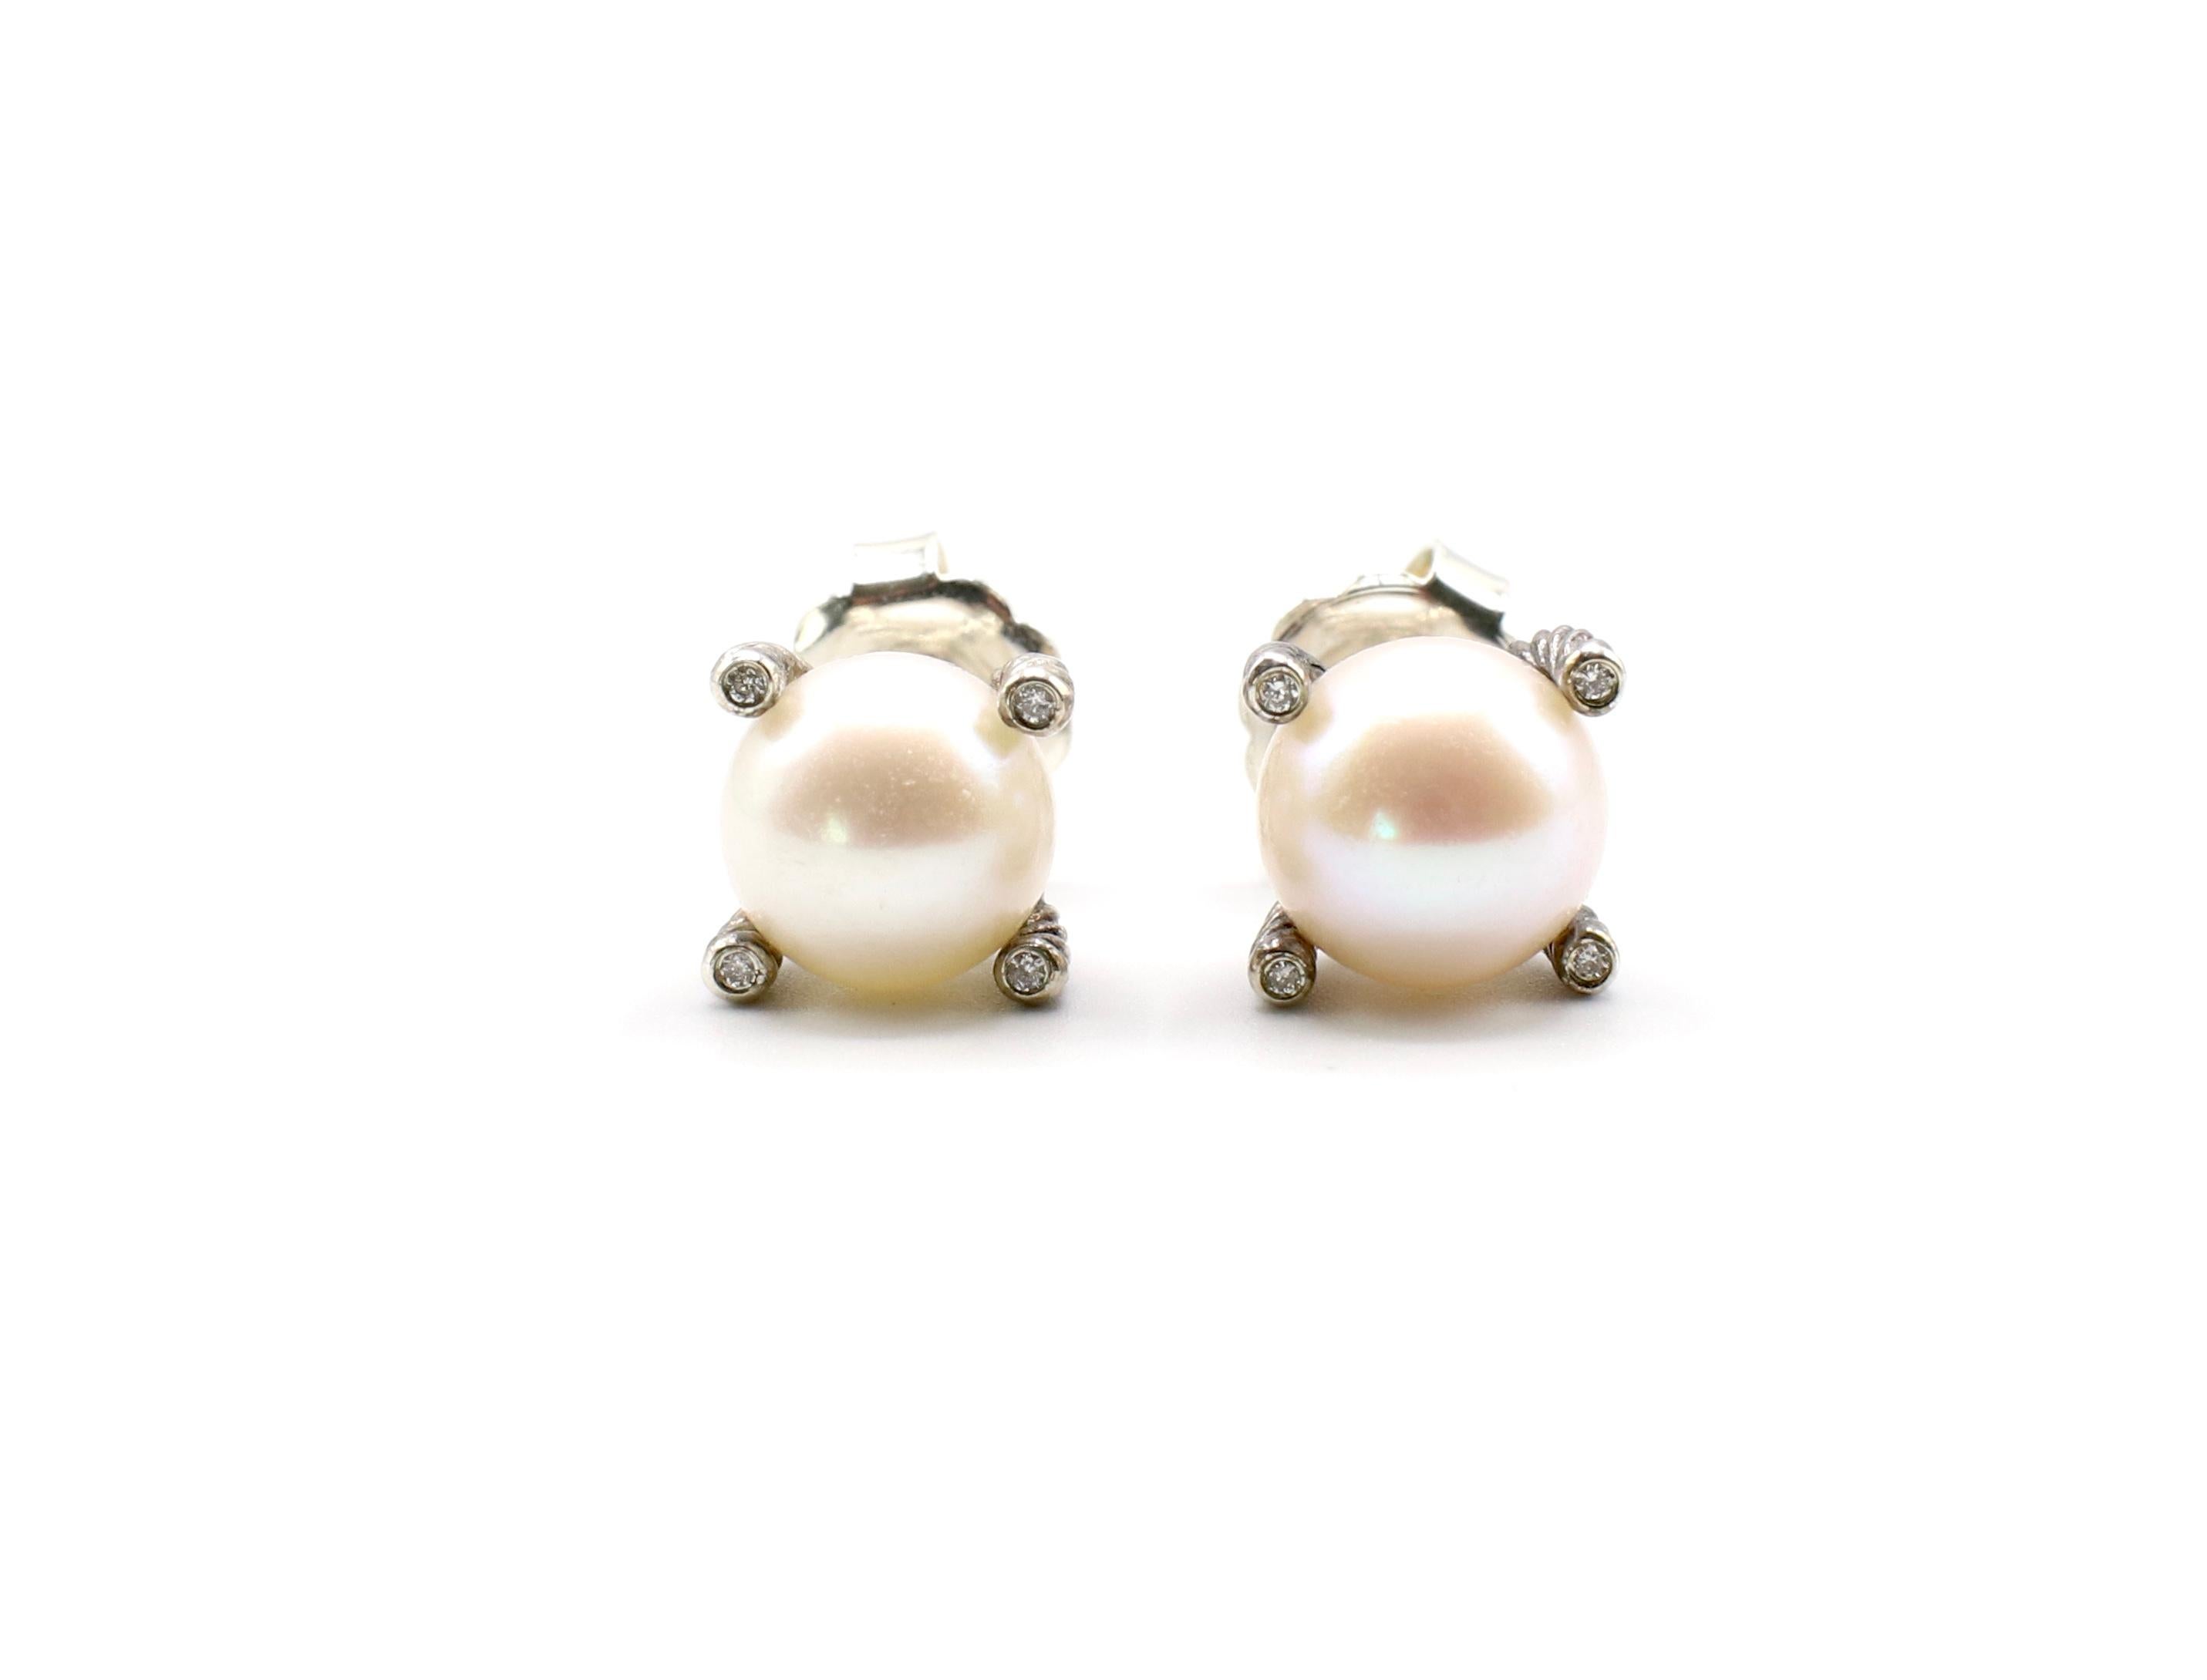 Vintage David Yurman Sterling Silver Pearl & Diamond Cable Ear Stud Earrings

Metal: Sterling silver
Weight: 4.96 grams
Pearls: 2 white cultured freshwater 9.5mm pearls
Diamonds: 8 round brilliant cut diamonds: .04 CTW G VS
Signed: D.Y. 925
Recently